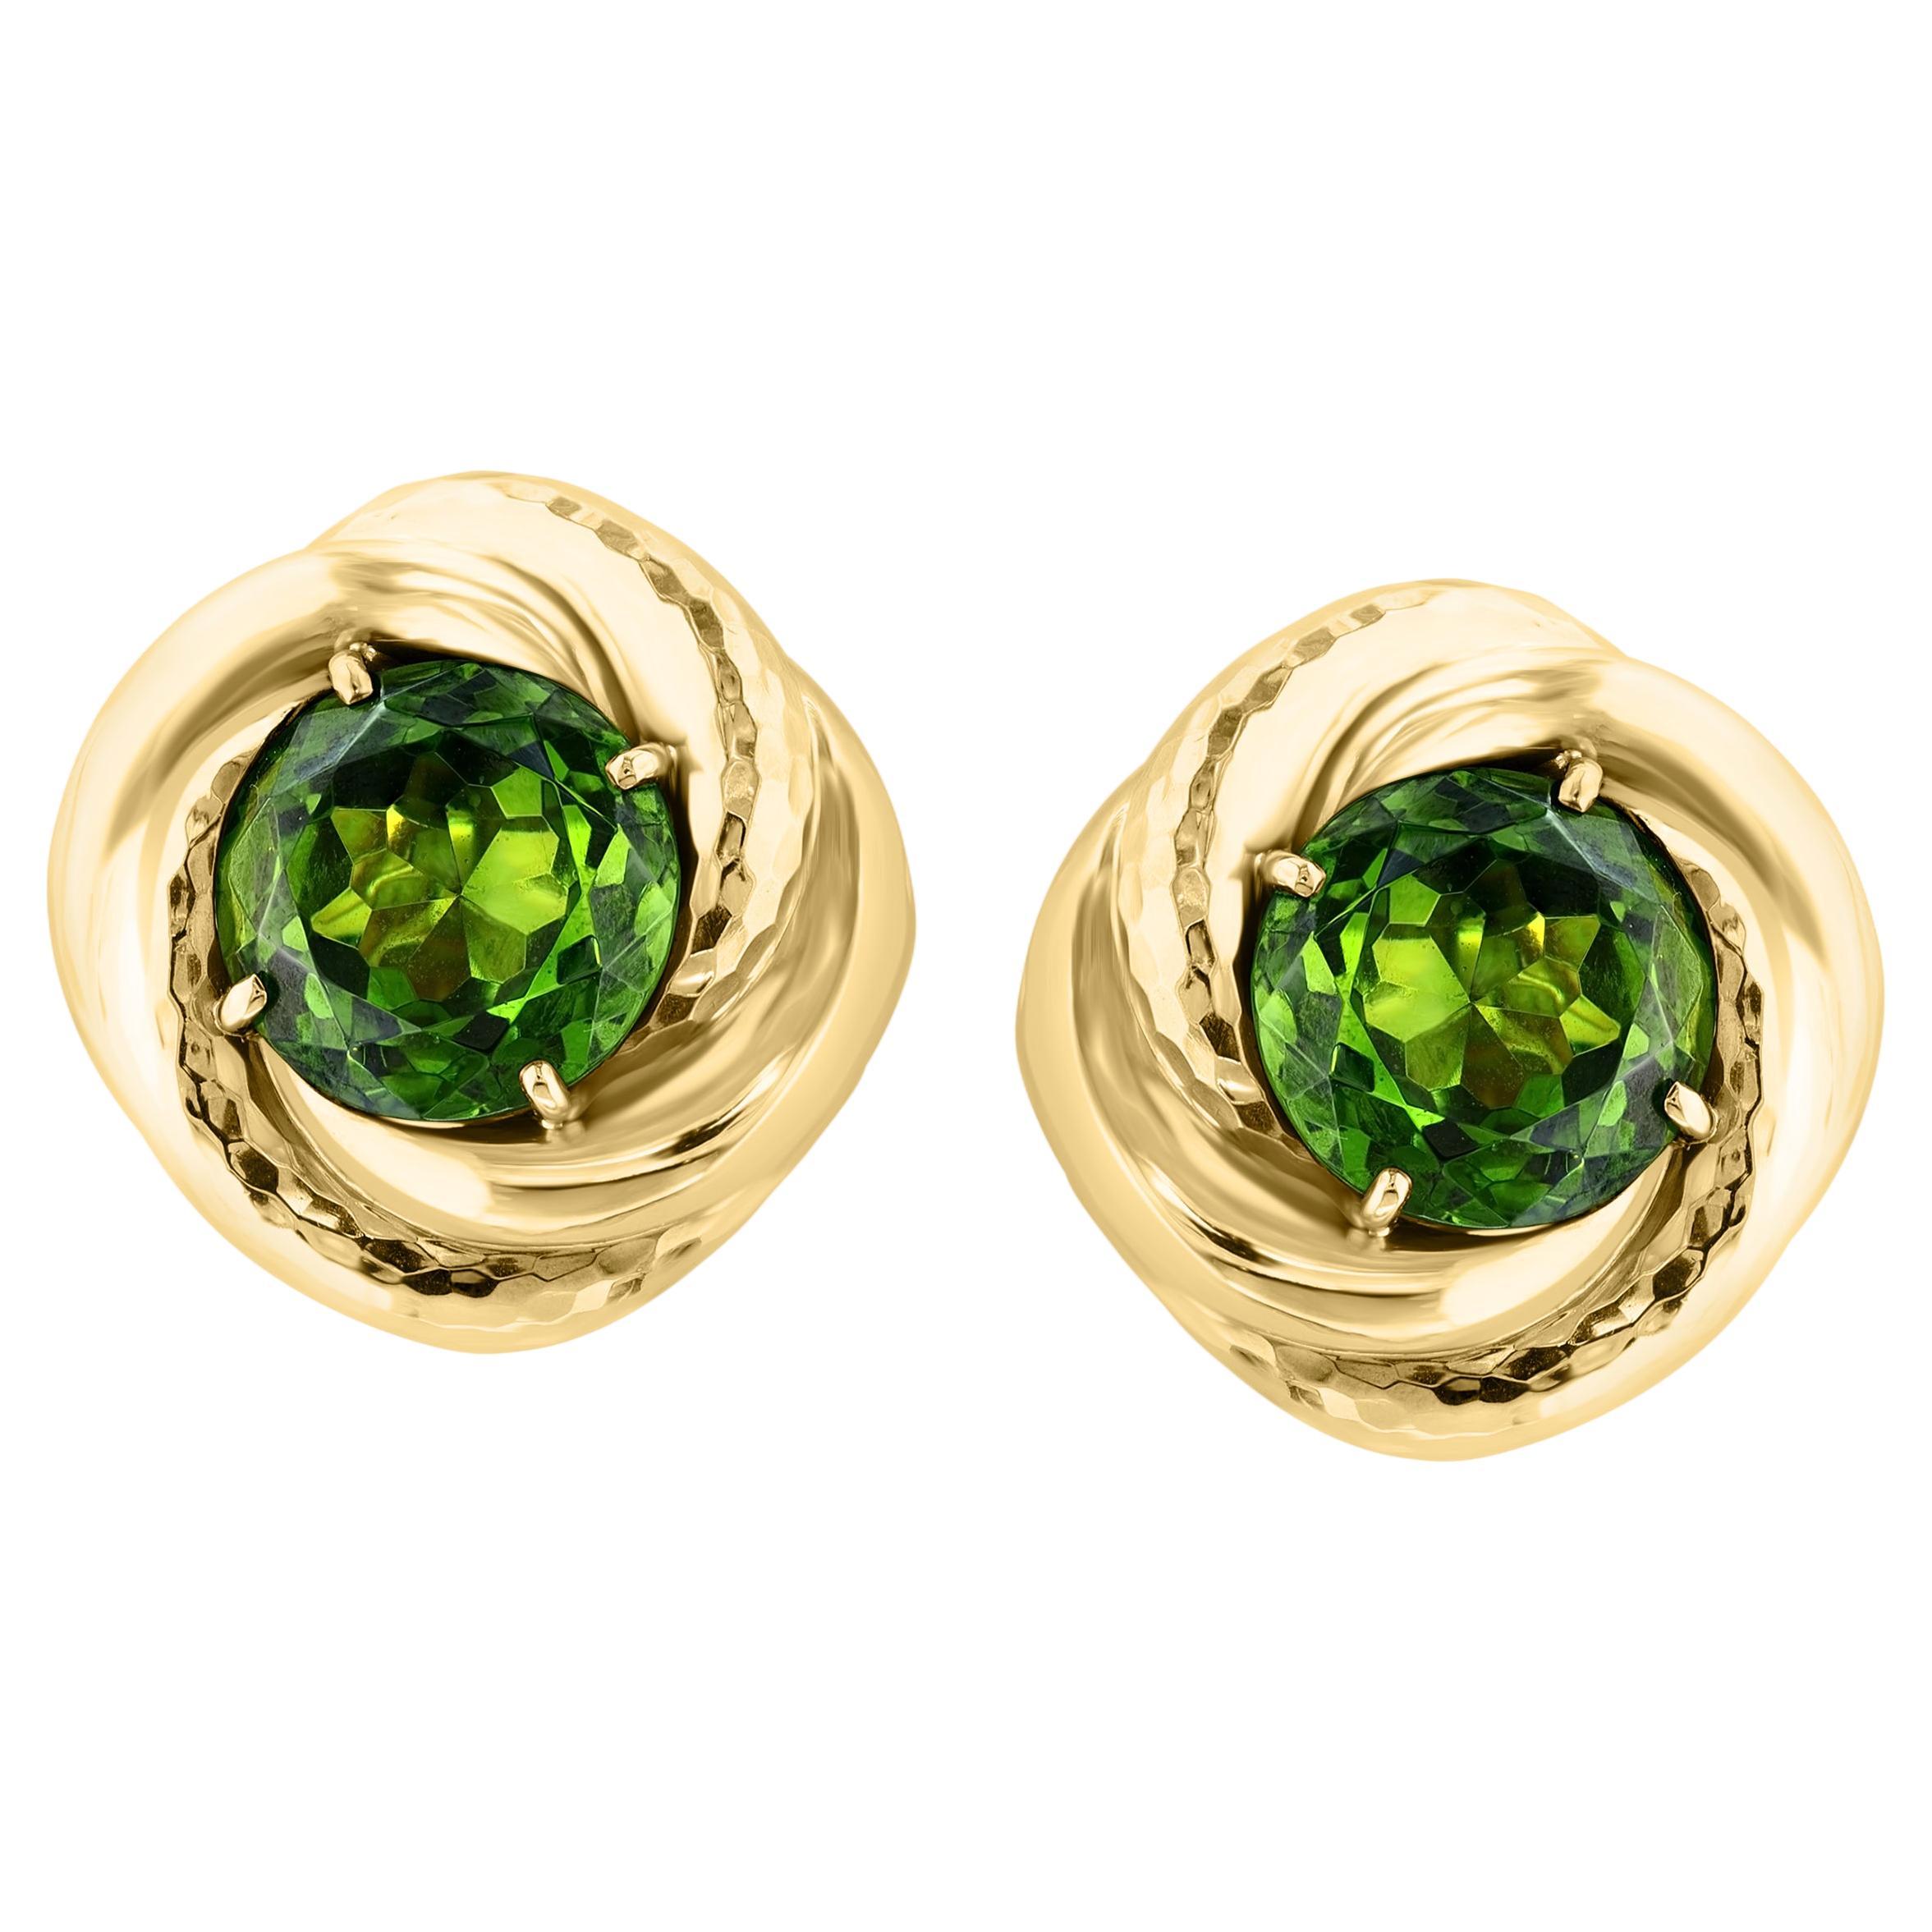 30Ct Natural Round Peridot Earrings by Andrew Clunn in 18 Kt Hammered Gold, Clip